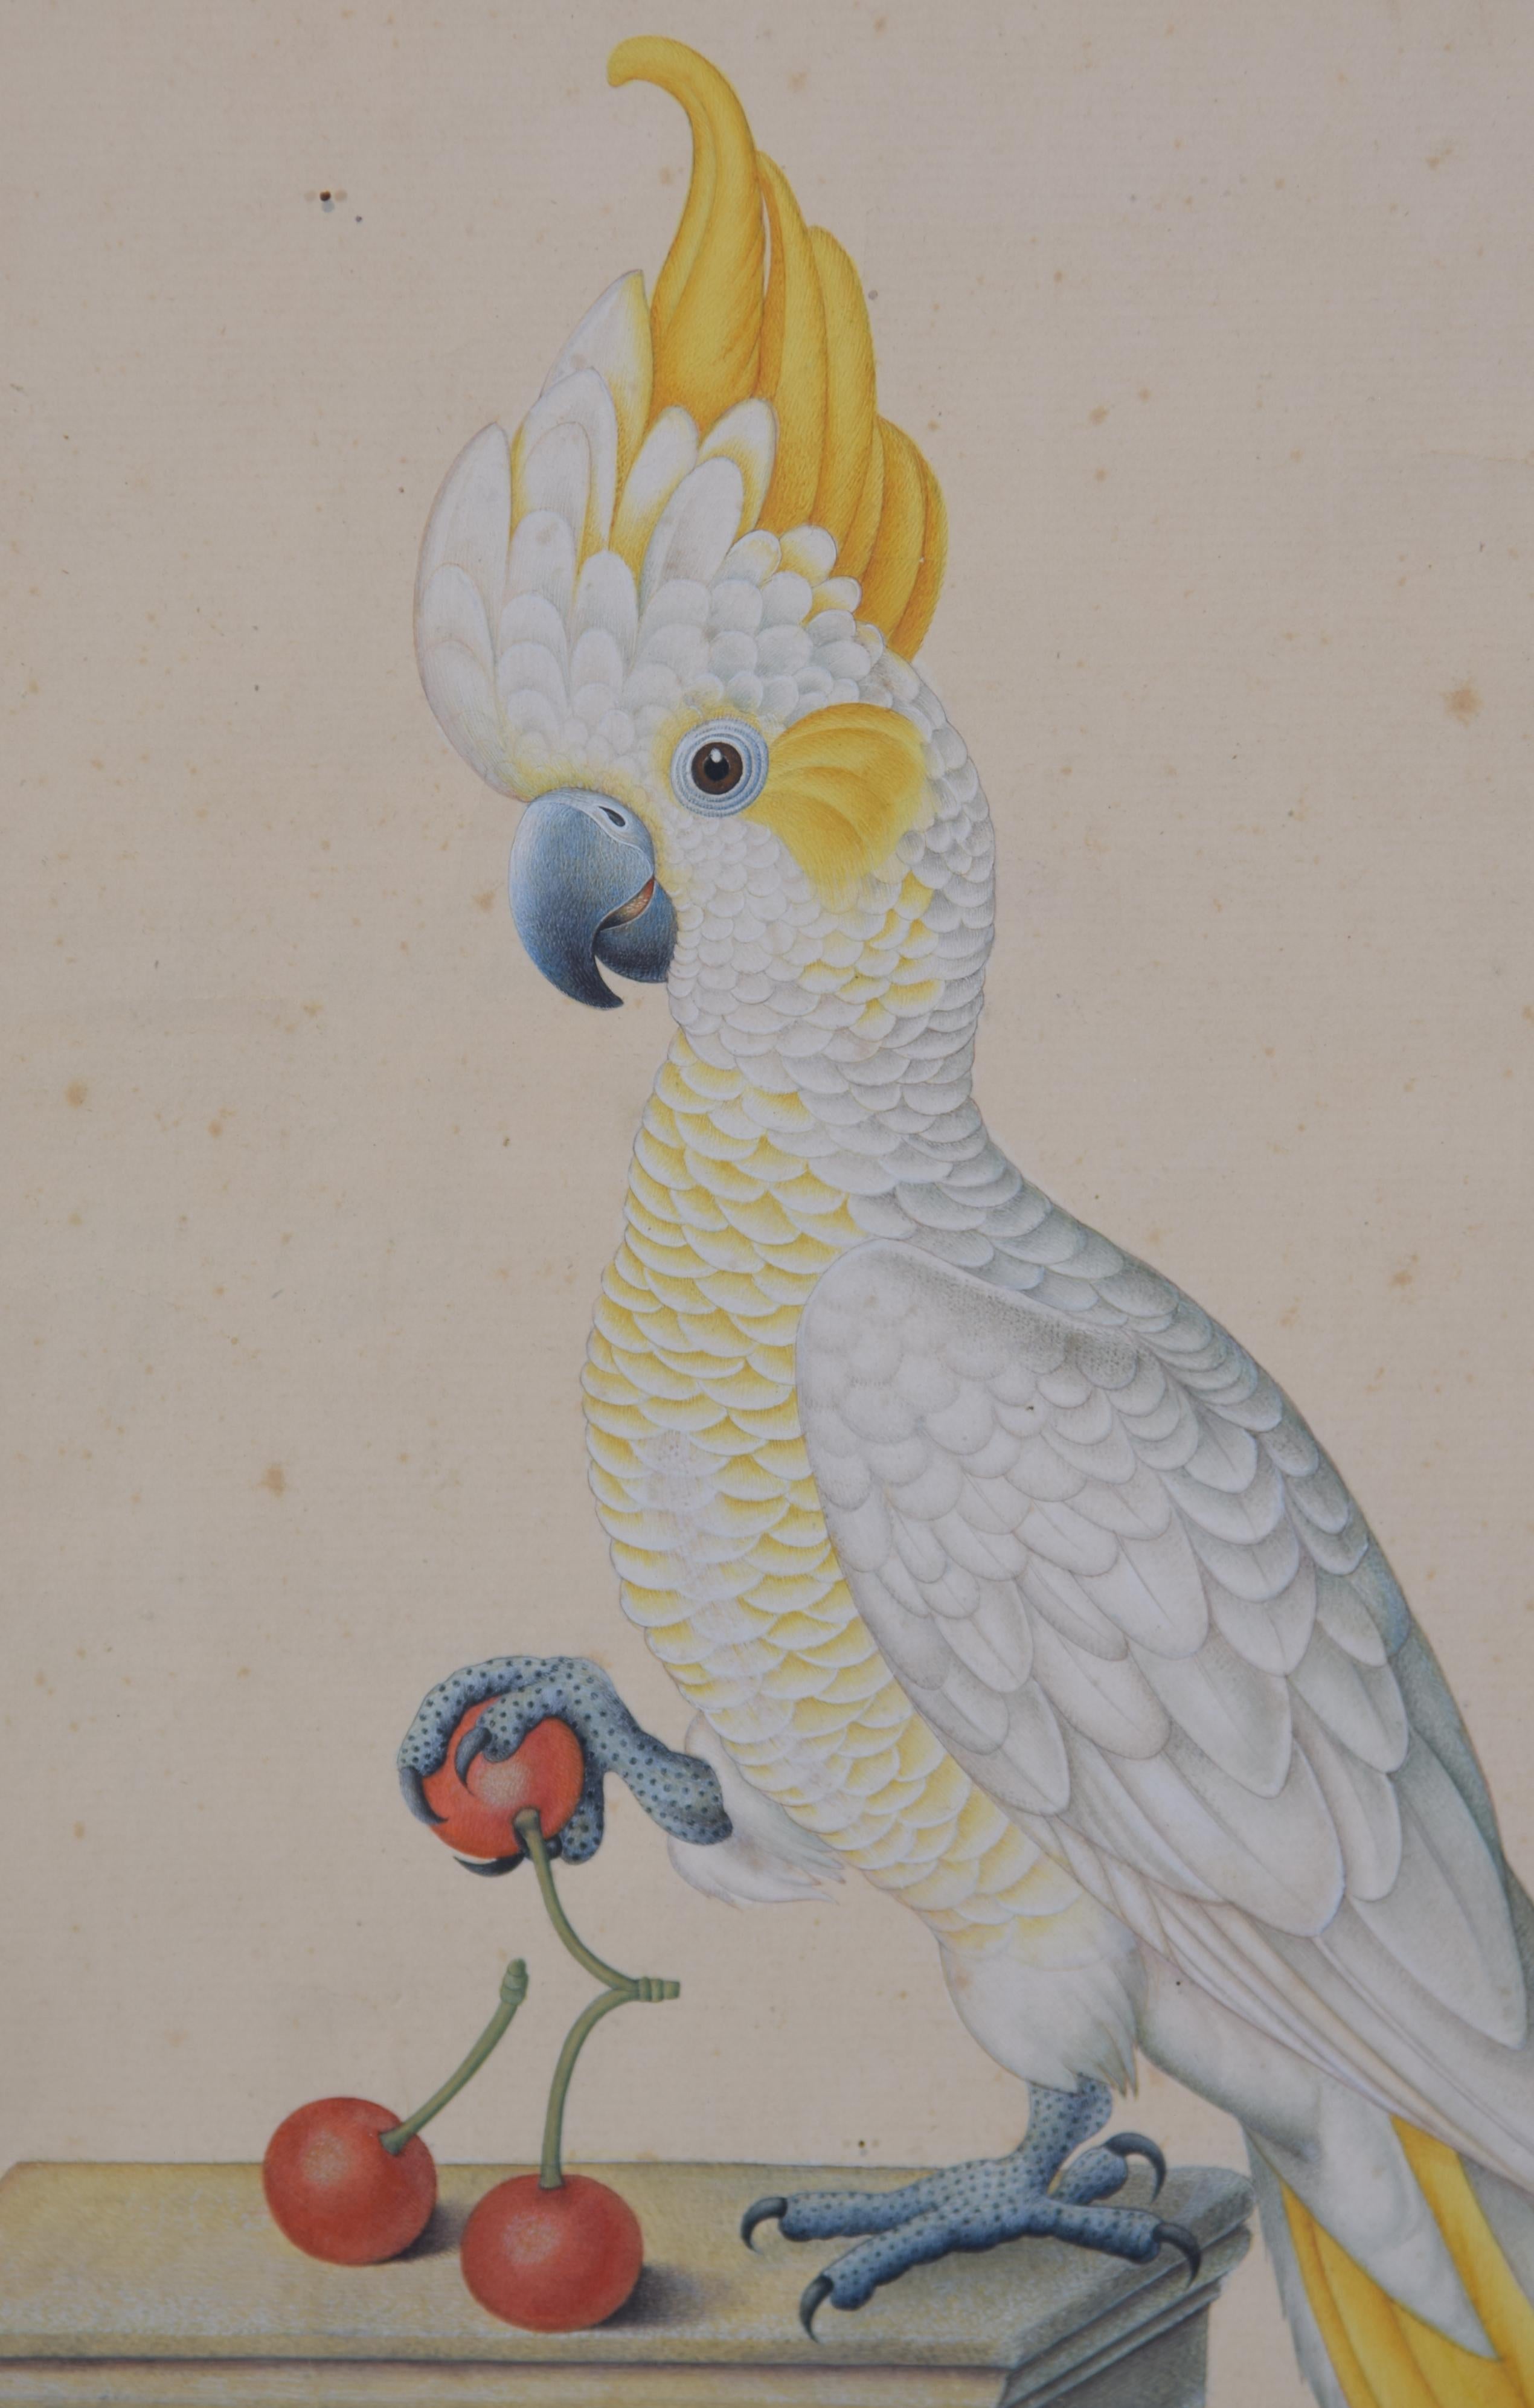 Cockatoo. Framed watercolour. 20th century.

Watercolour showing a cockatoo (possibly sulphurous) perched on a stone bench and picking a cherry with one of its legs. In its detail and composition, the work is reminiscent of the 19th century